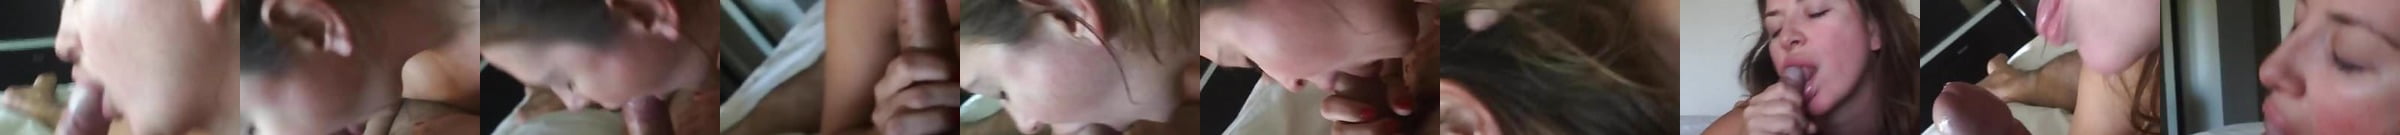 Ex Giving Head Free Homemade Porn Video F2 Xhamster